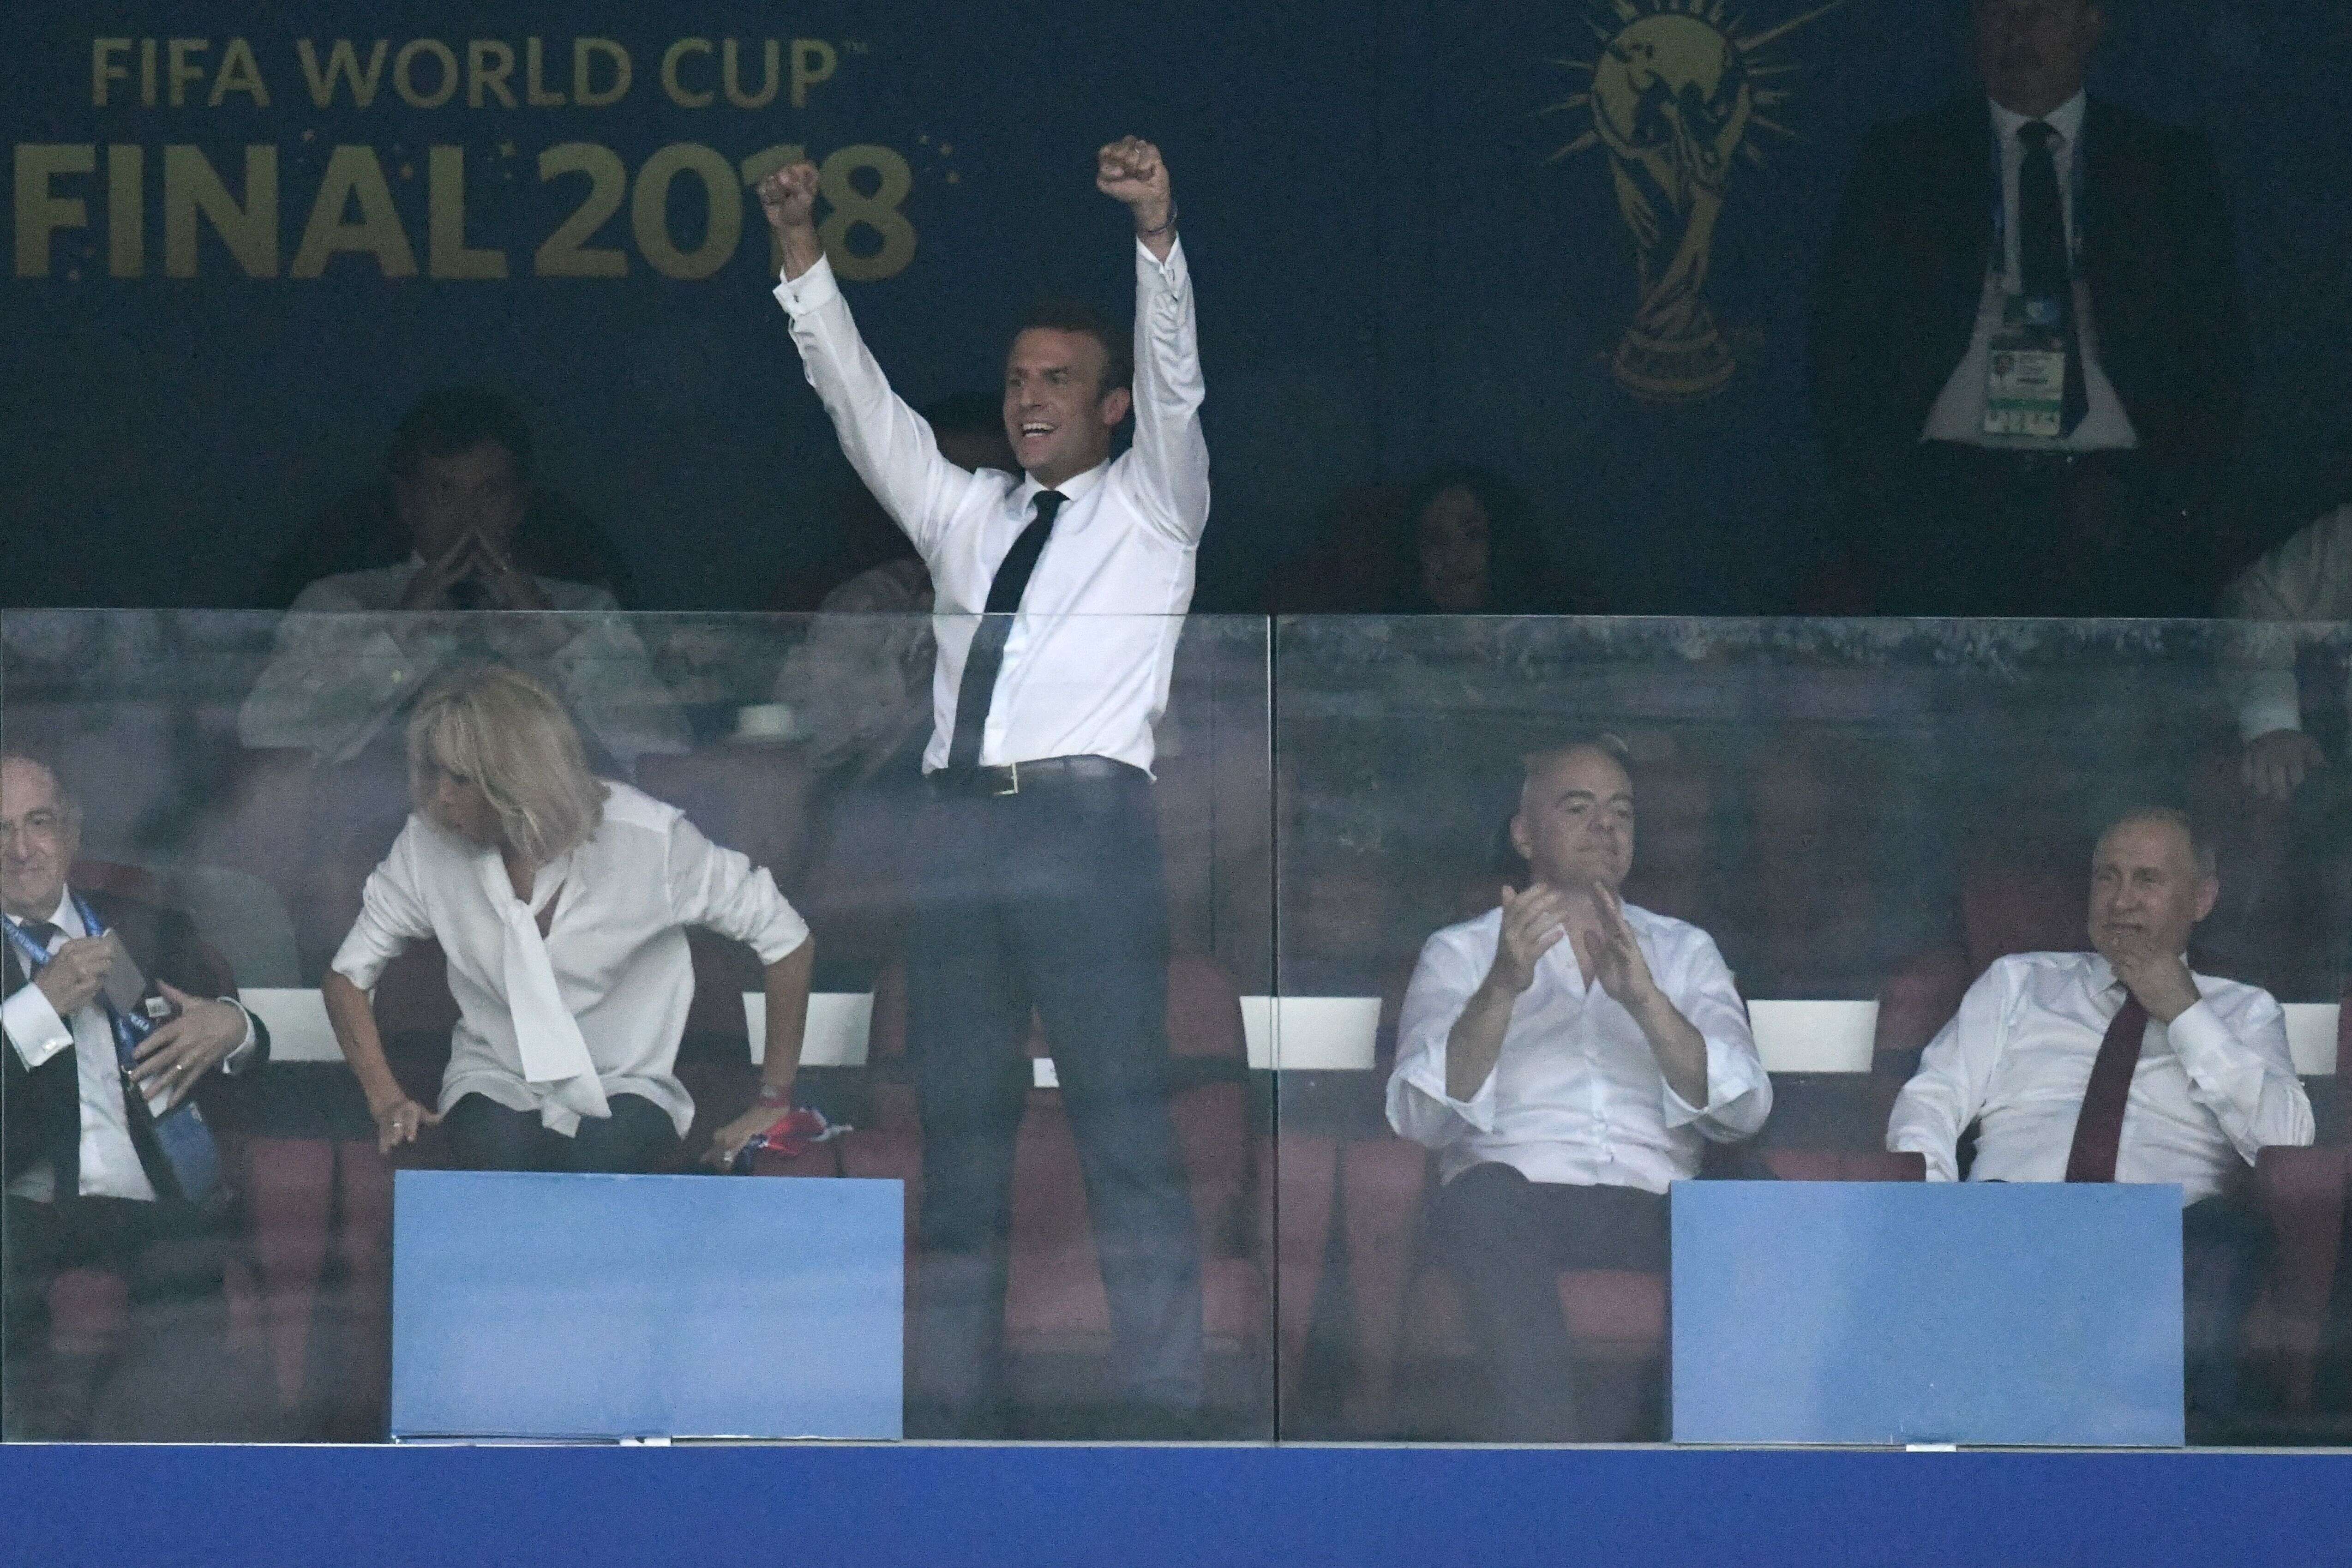 French President Emmanuel Macron celebrates his team's goal during the Russia 2018 World Cup final football match between France and Croatia at the Luzhniki Stadium in Moscow on July 15, 2018. (Photo by Christophe SIMON / AFP) / RESTRICTED TO EDITORIAL USE - NO MOBILE PUSH ALERTS/DOWNLOADS